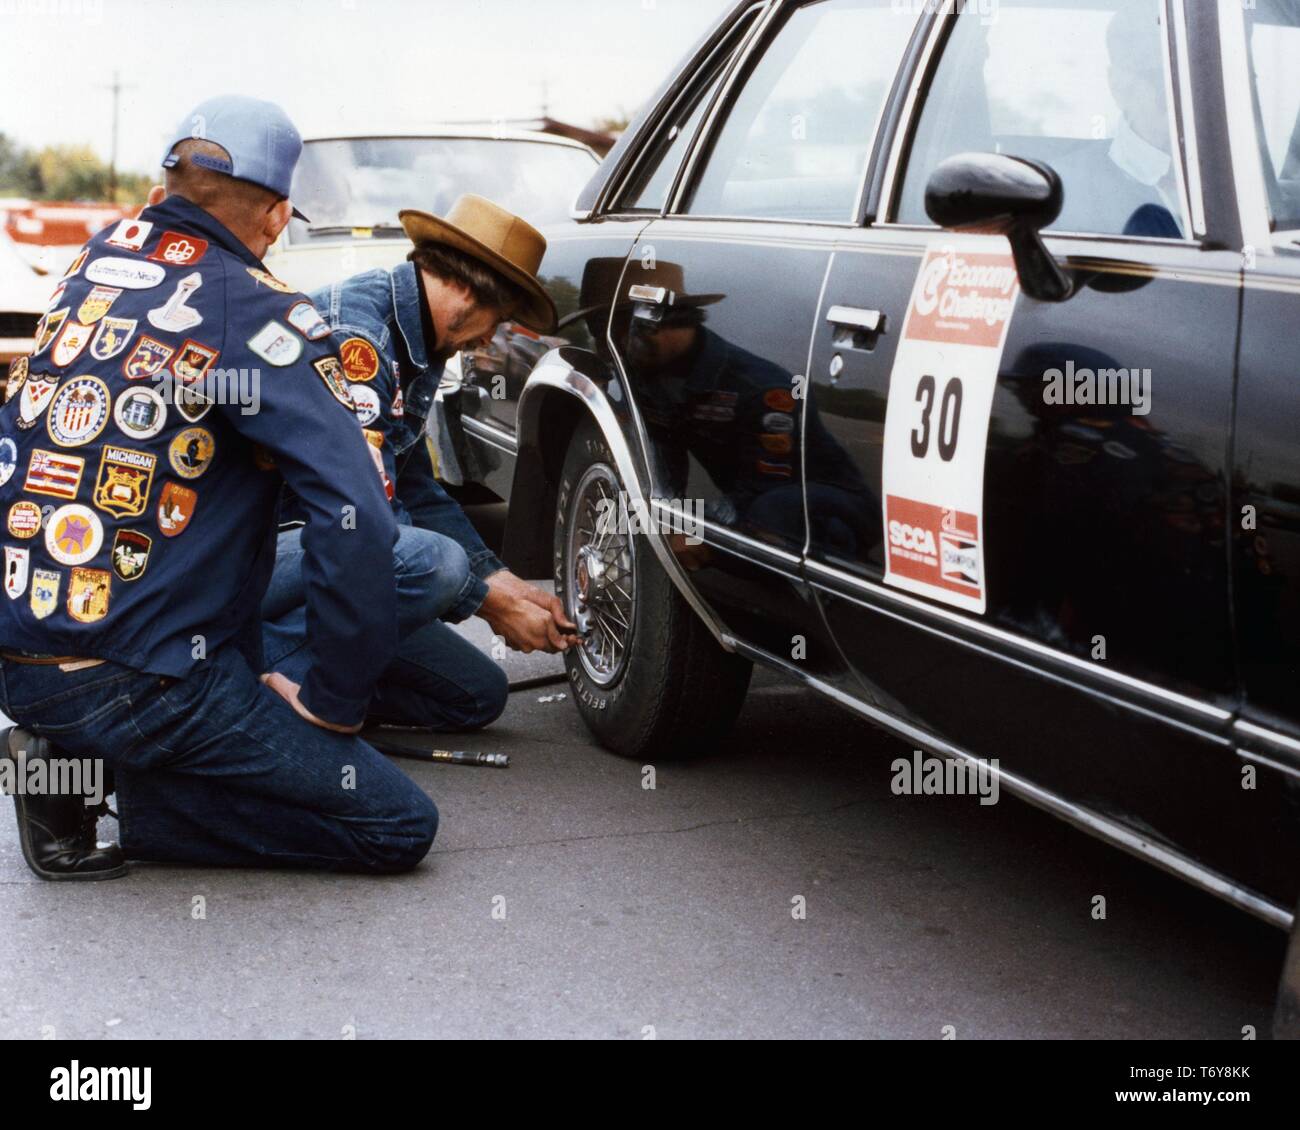 Tow men, wearing jackets with patches, check the tire of a black sedan after a competitive fuel efficiency driving event, 1975. Image courtesy US Department of Energy. () Stock Photo